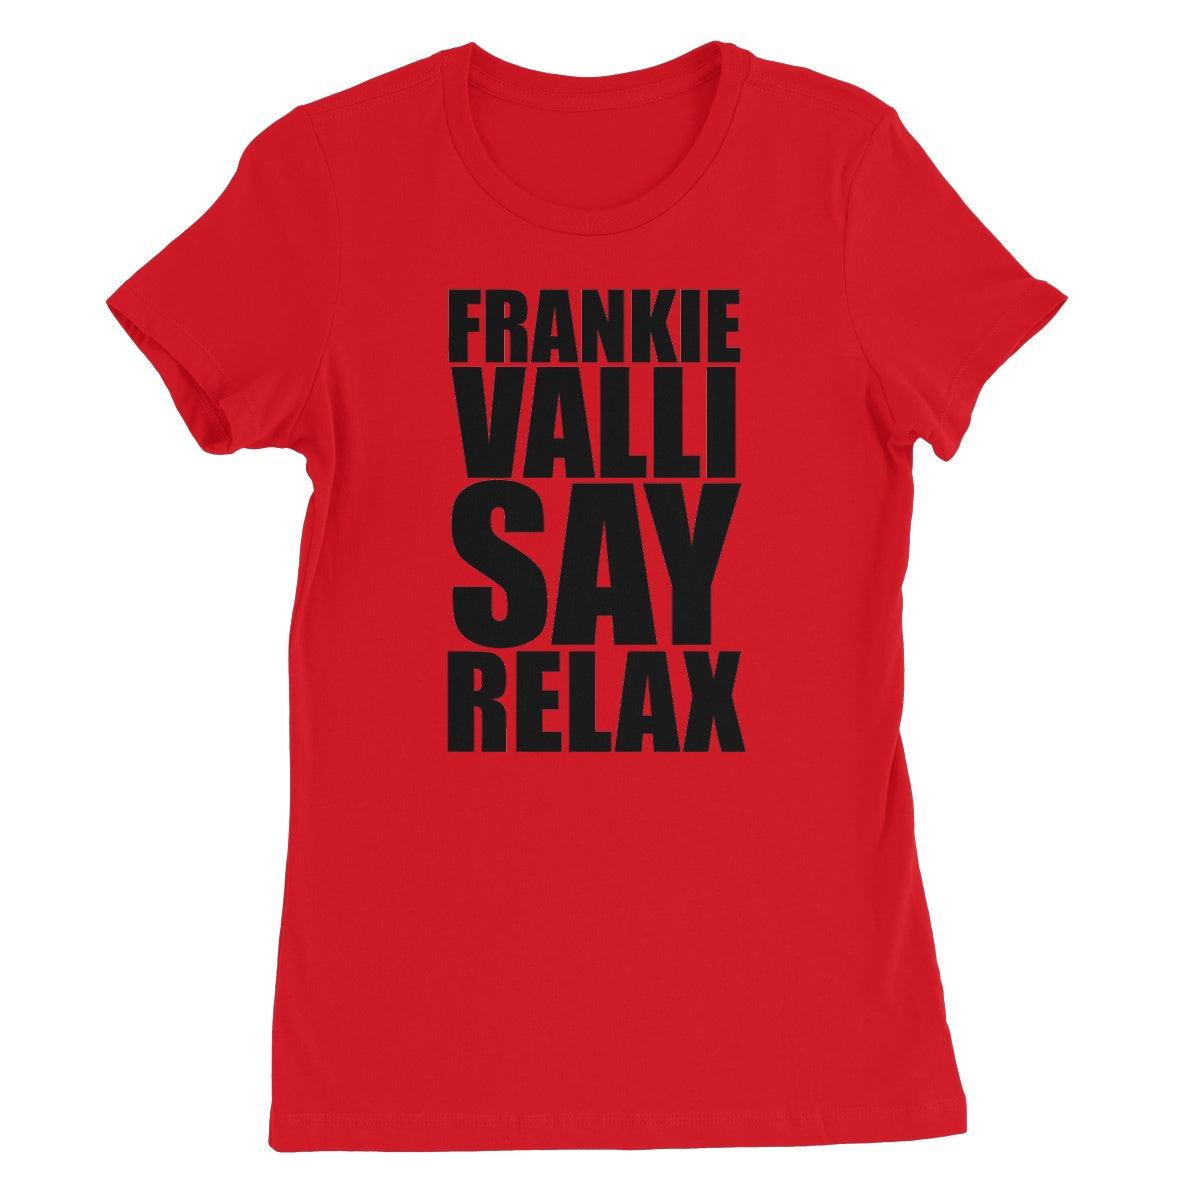 Frankie Valli Say Relax Women's Favourite T-Shirt | Apparel Red